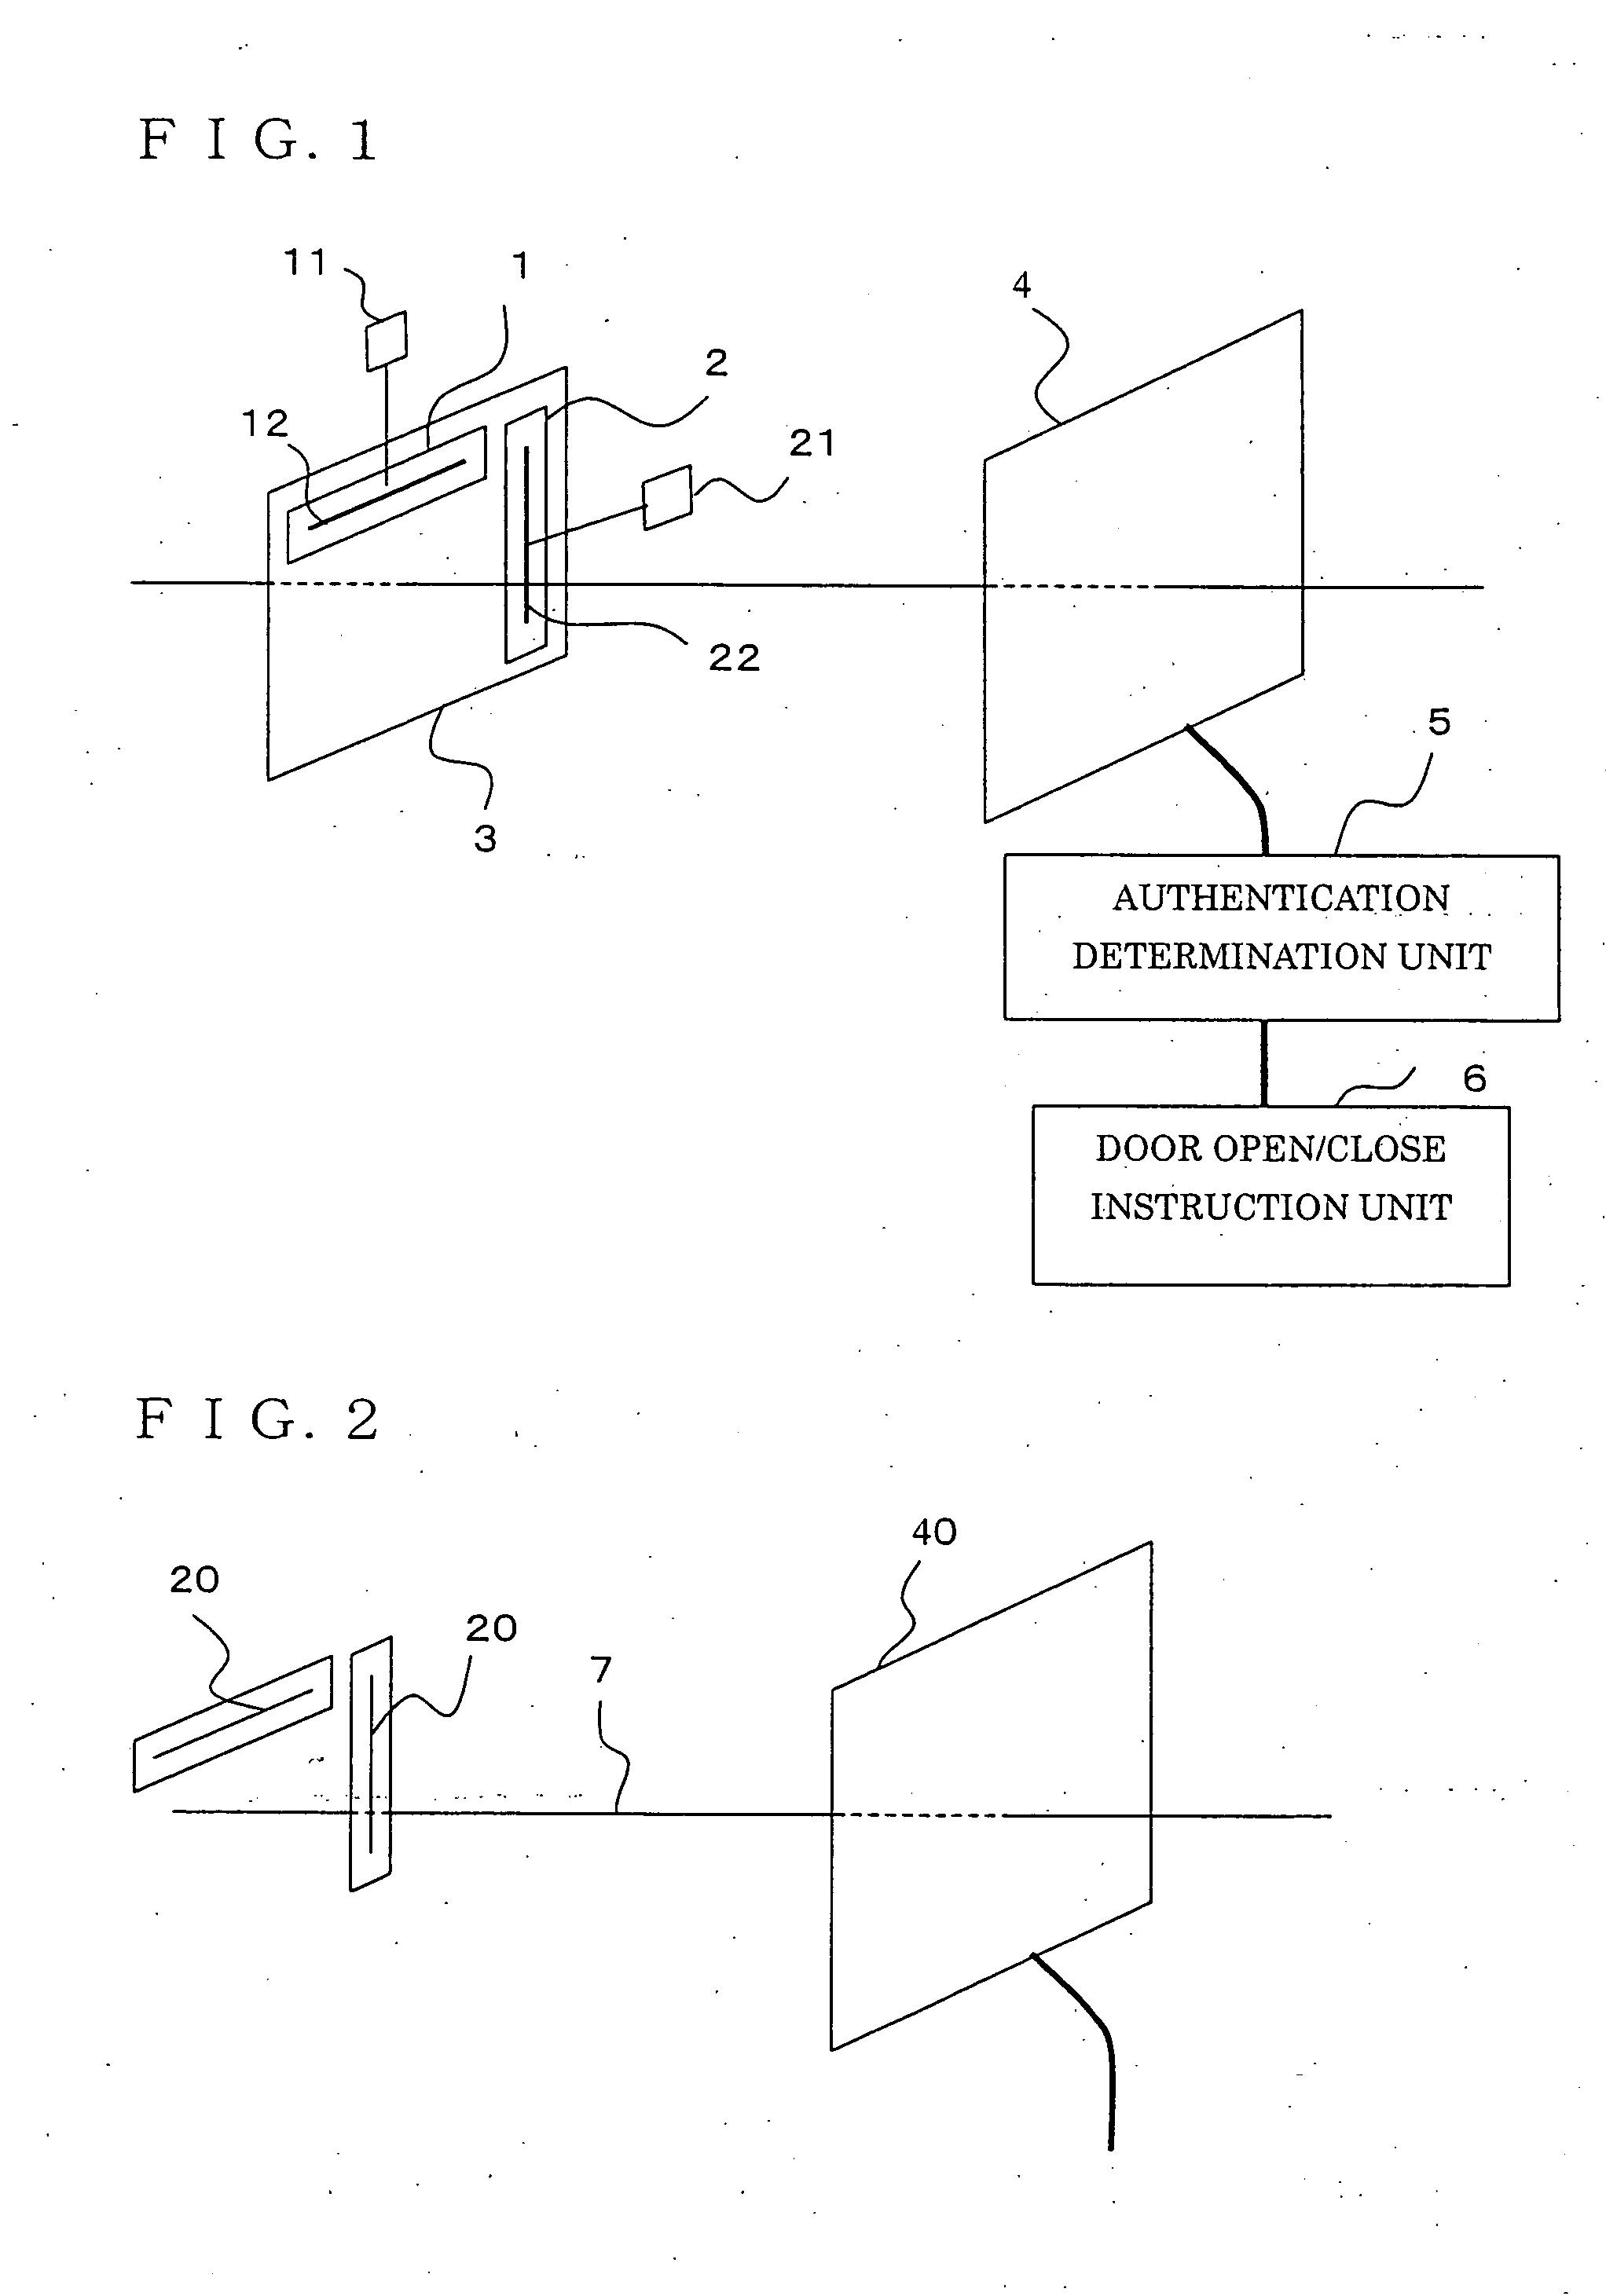 User authentication system and room entry/exit management system